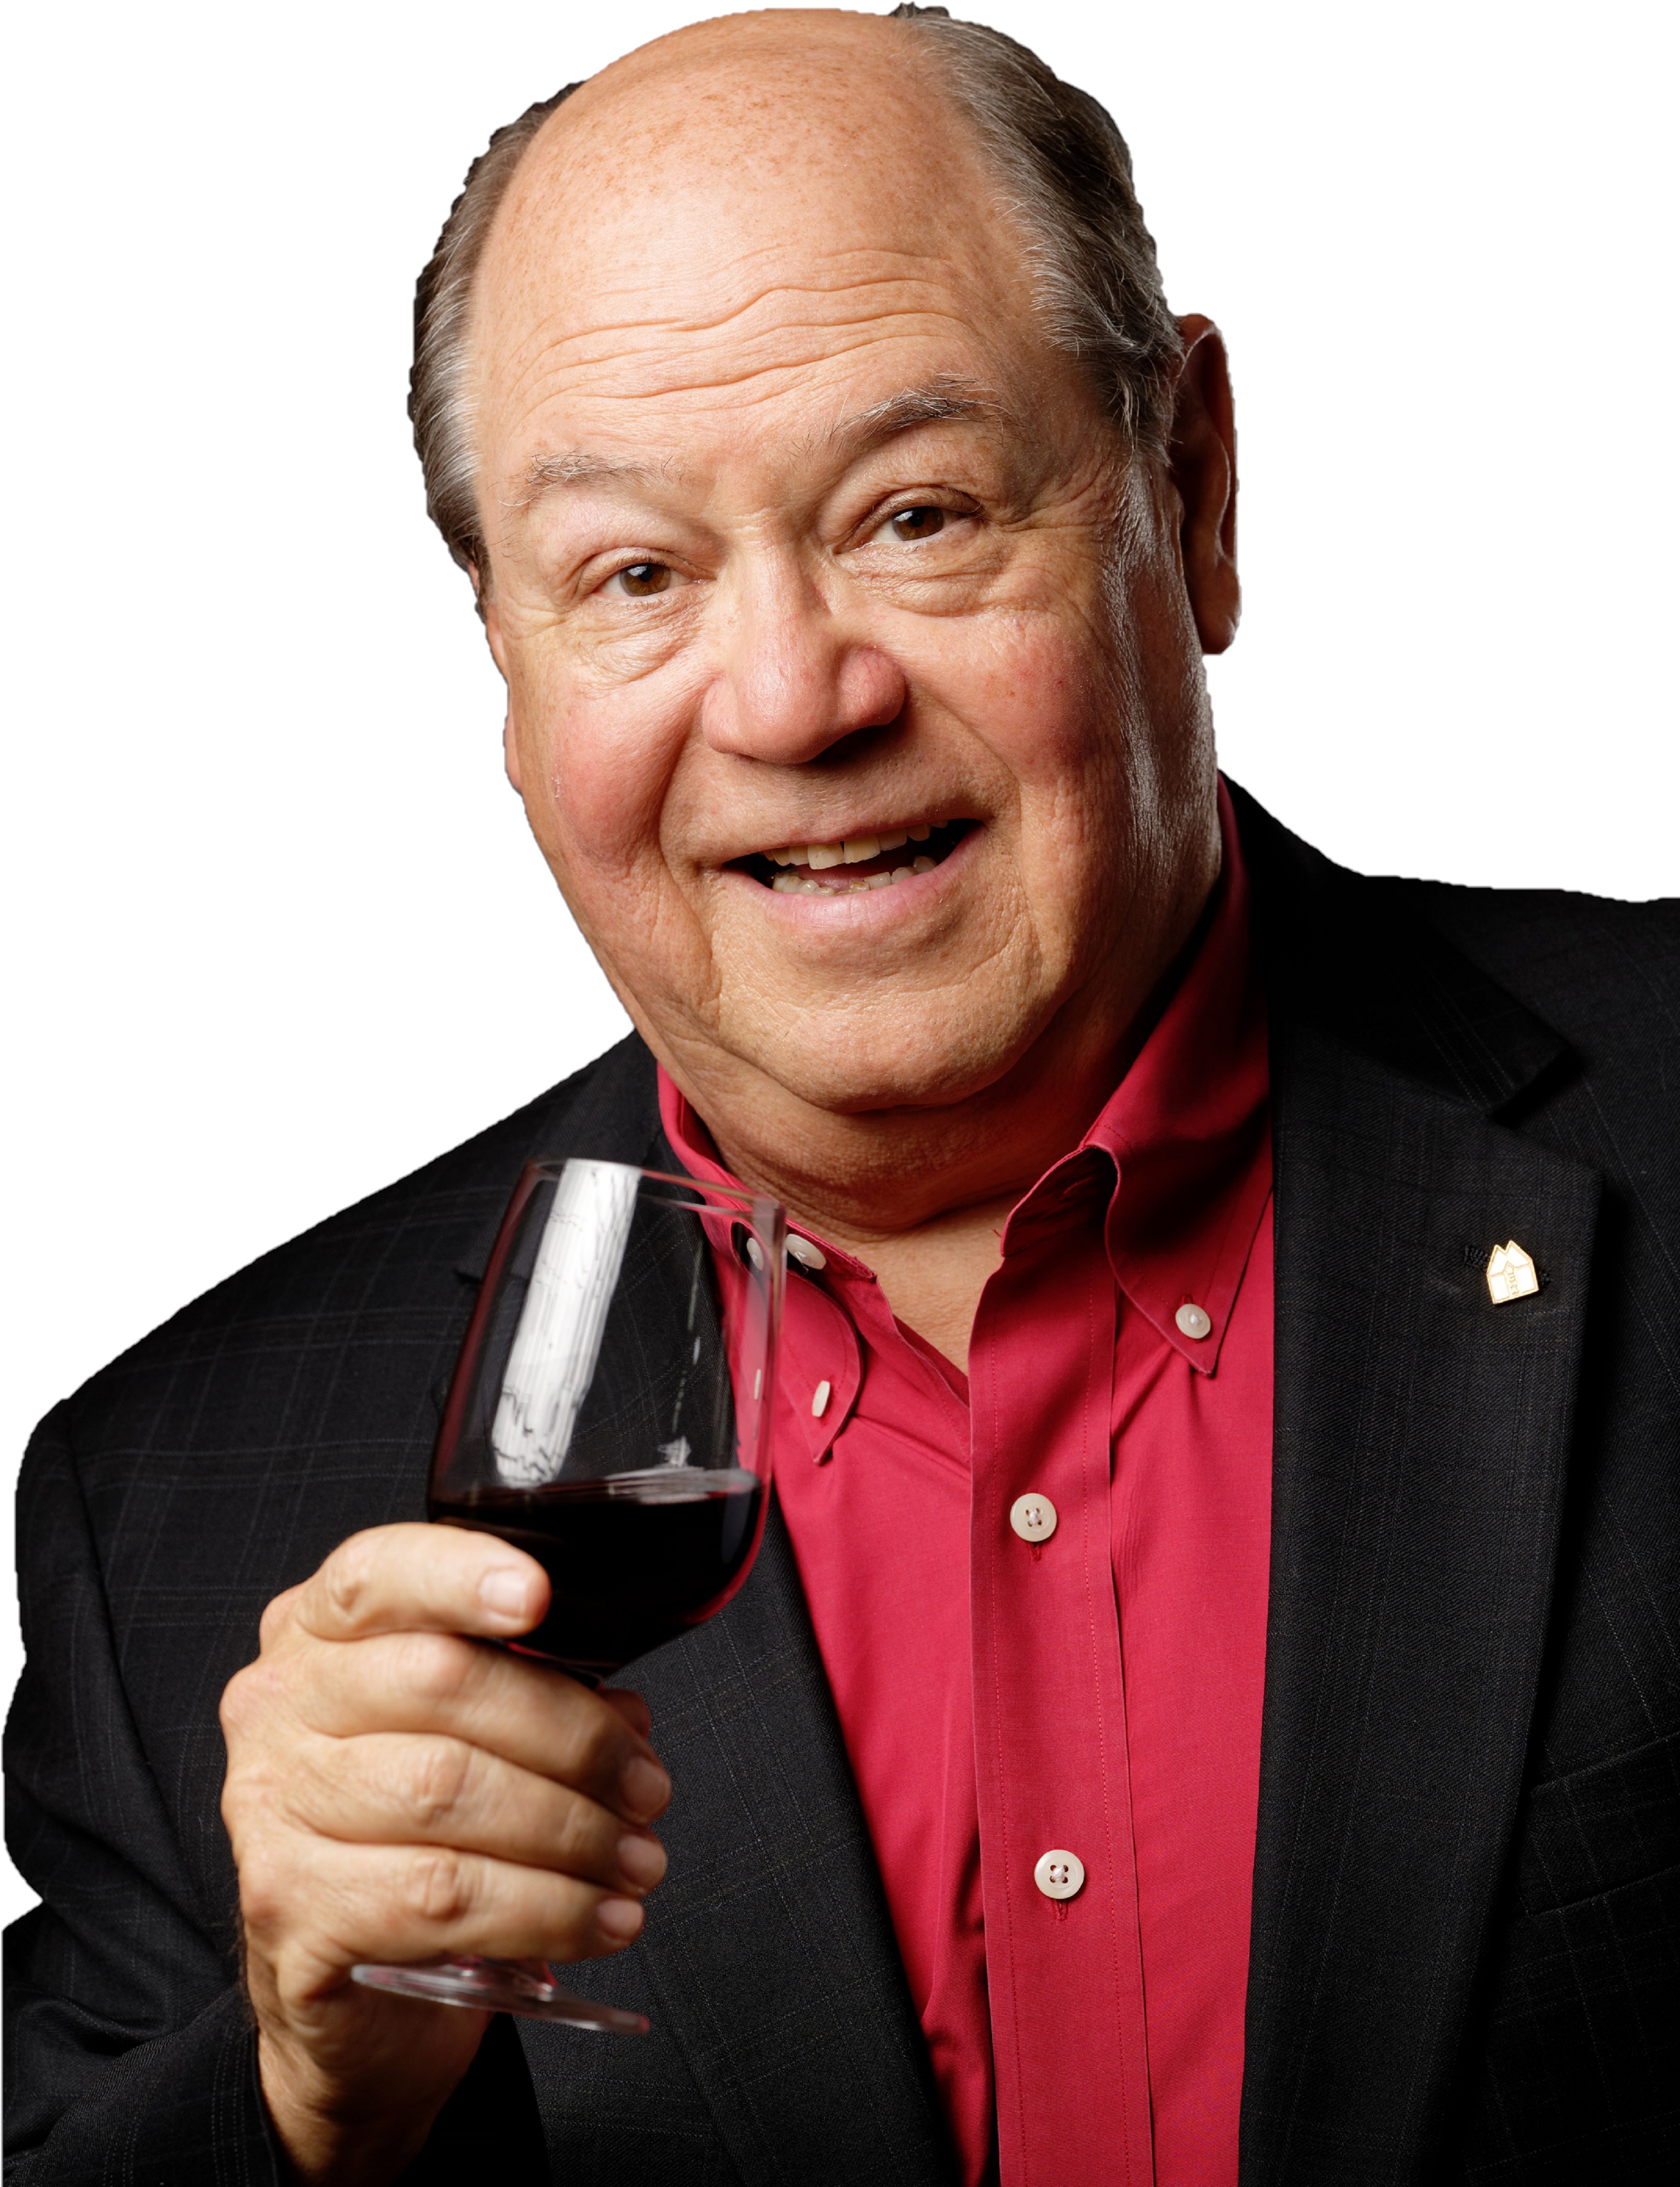 Bob Monica standing in a black blazer and red collared shirt while holding a glass of wine in his right hand.